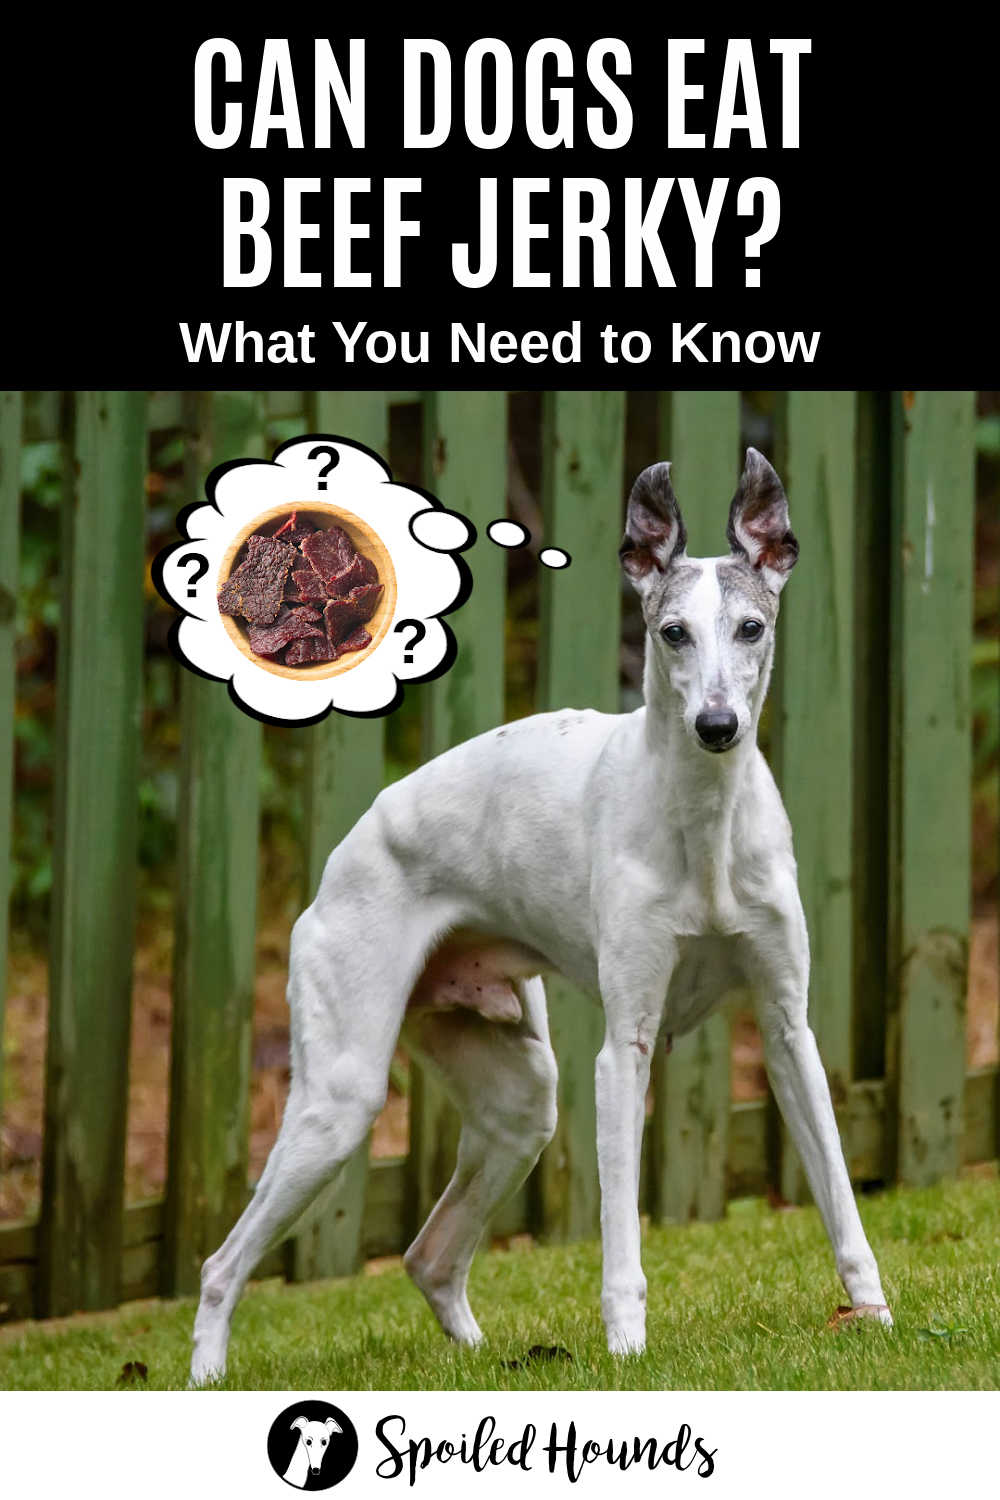 whippet dog wondering about beef jerky